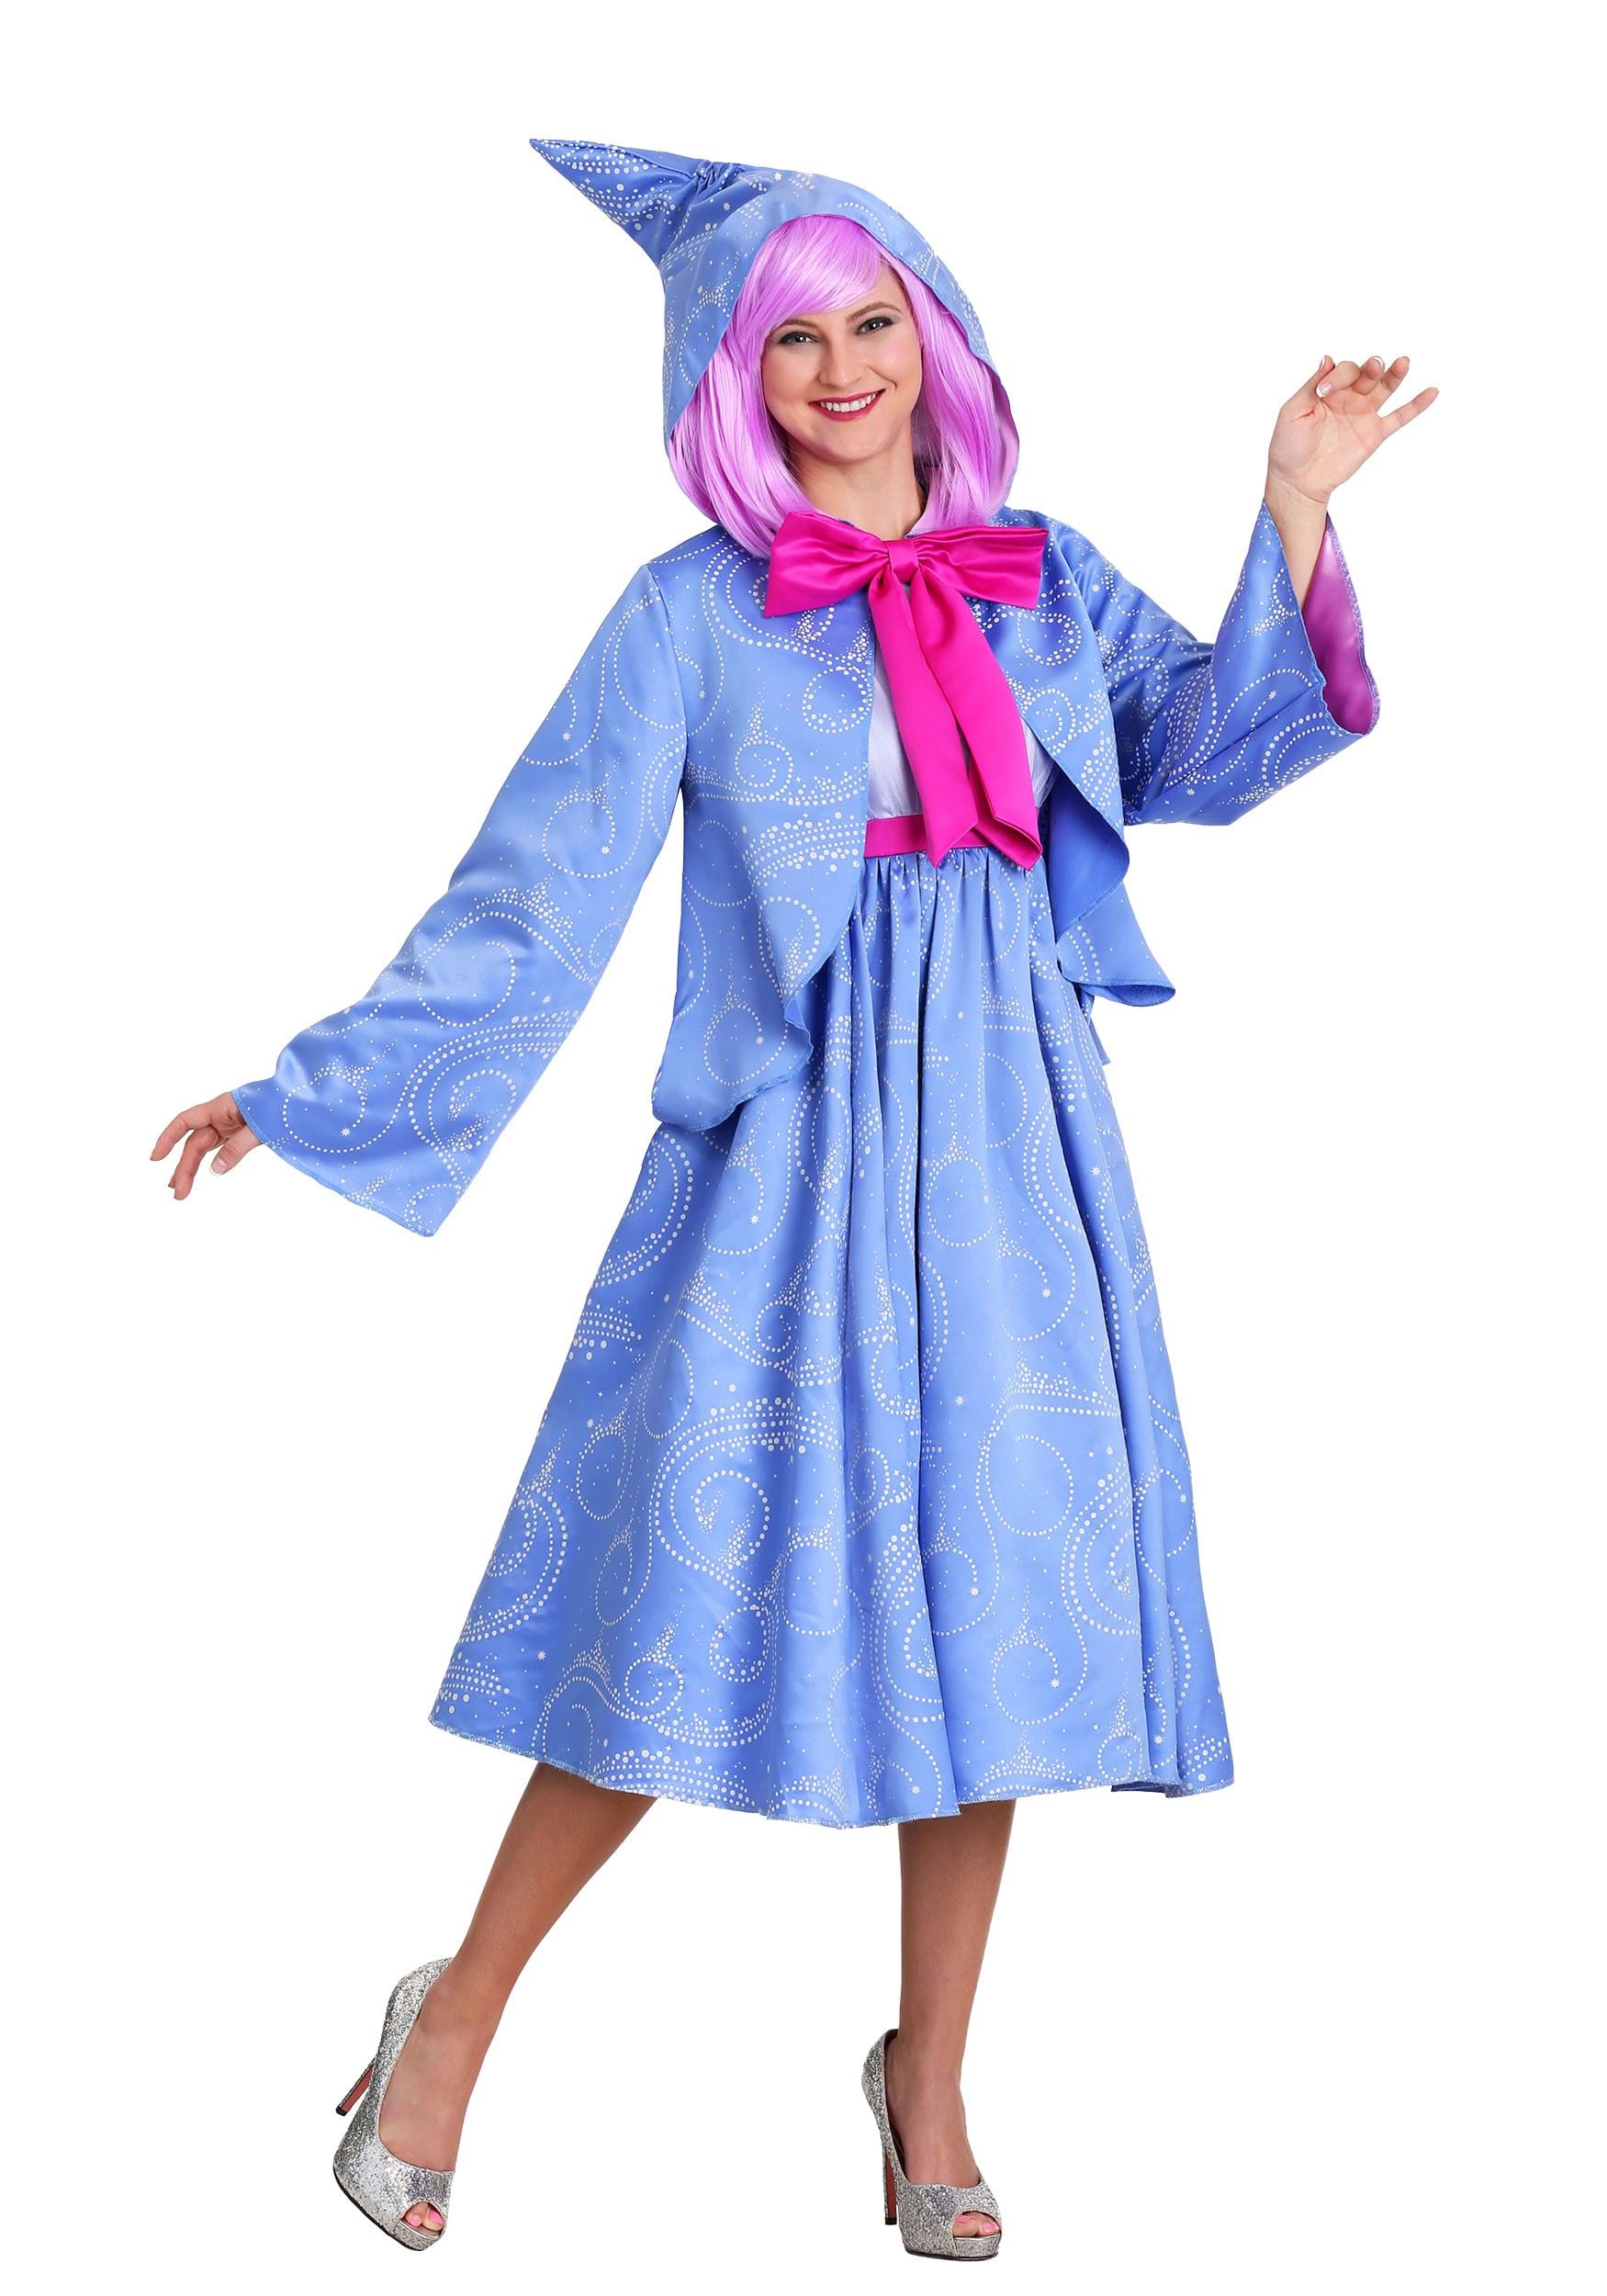 Photos - Fancy Dress Disney Disguise Limited Fairy Godmother Costume Adult Plus Size Pink/Blue DI1 